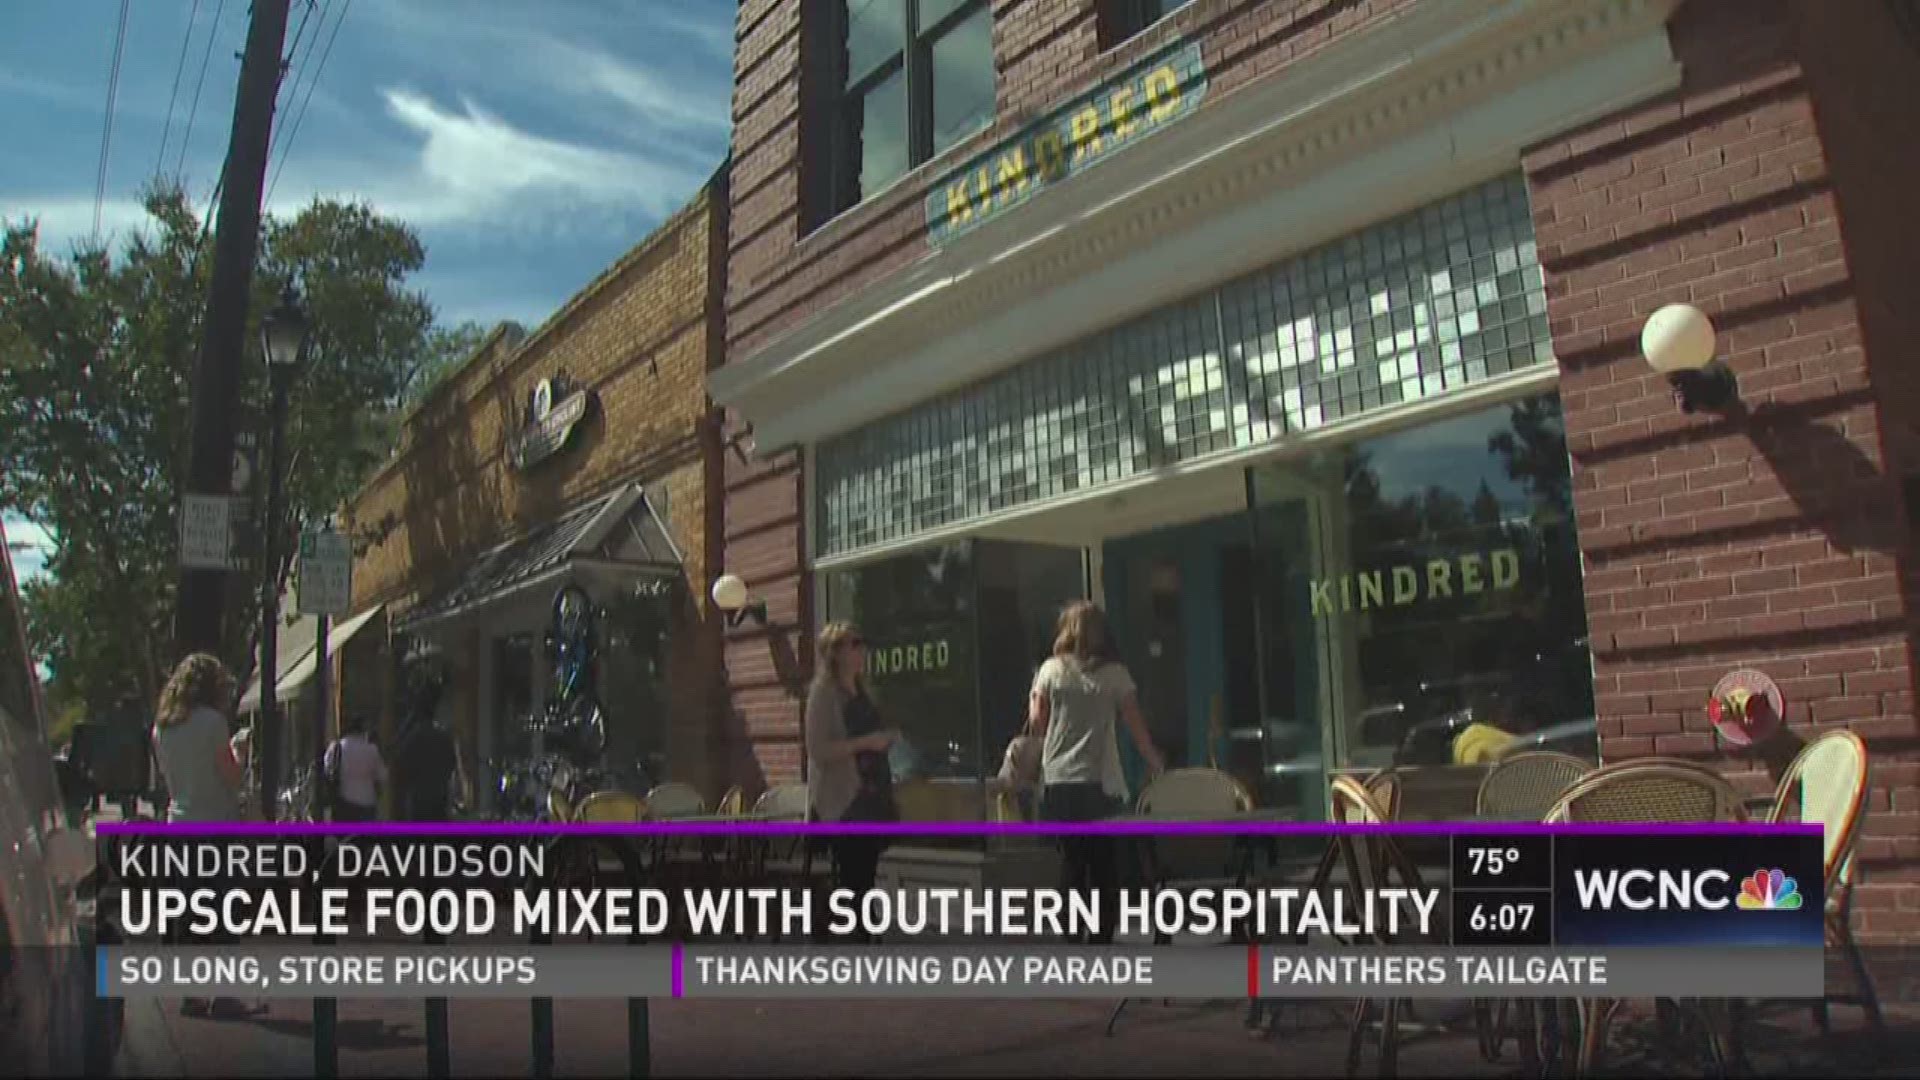 Upscale food mixed with Southern hospitality